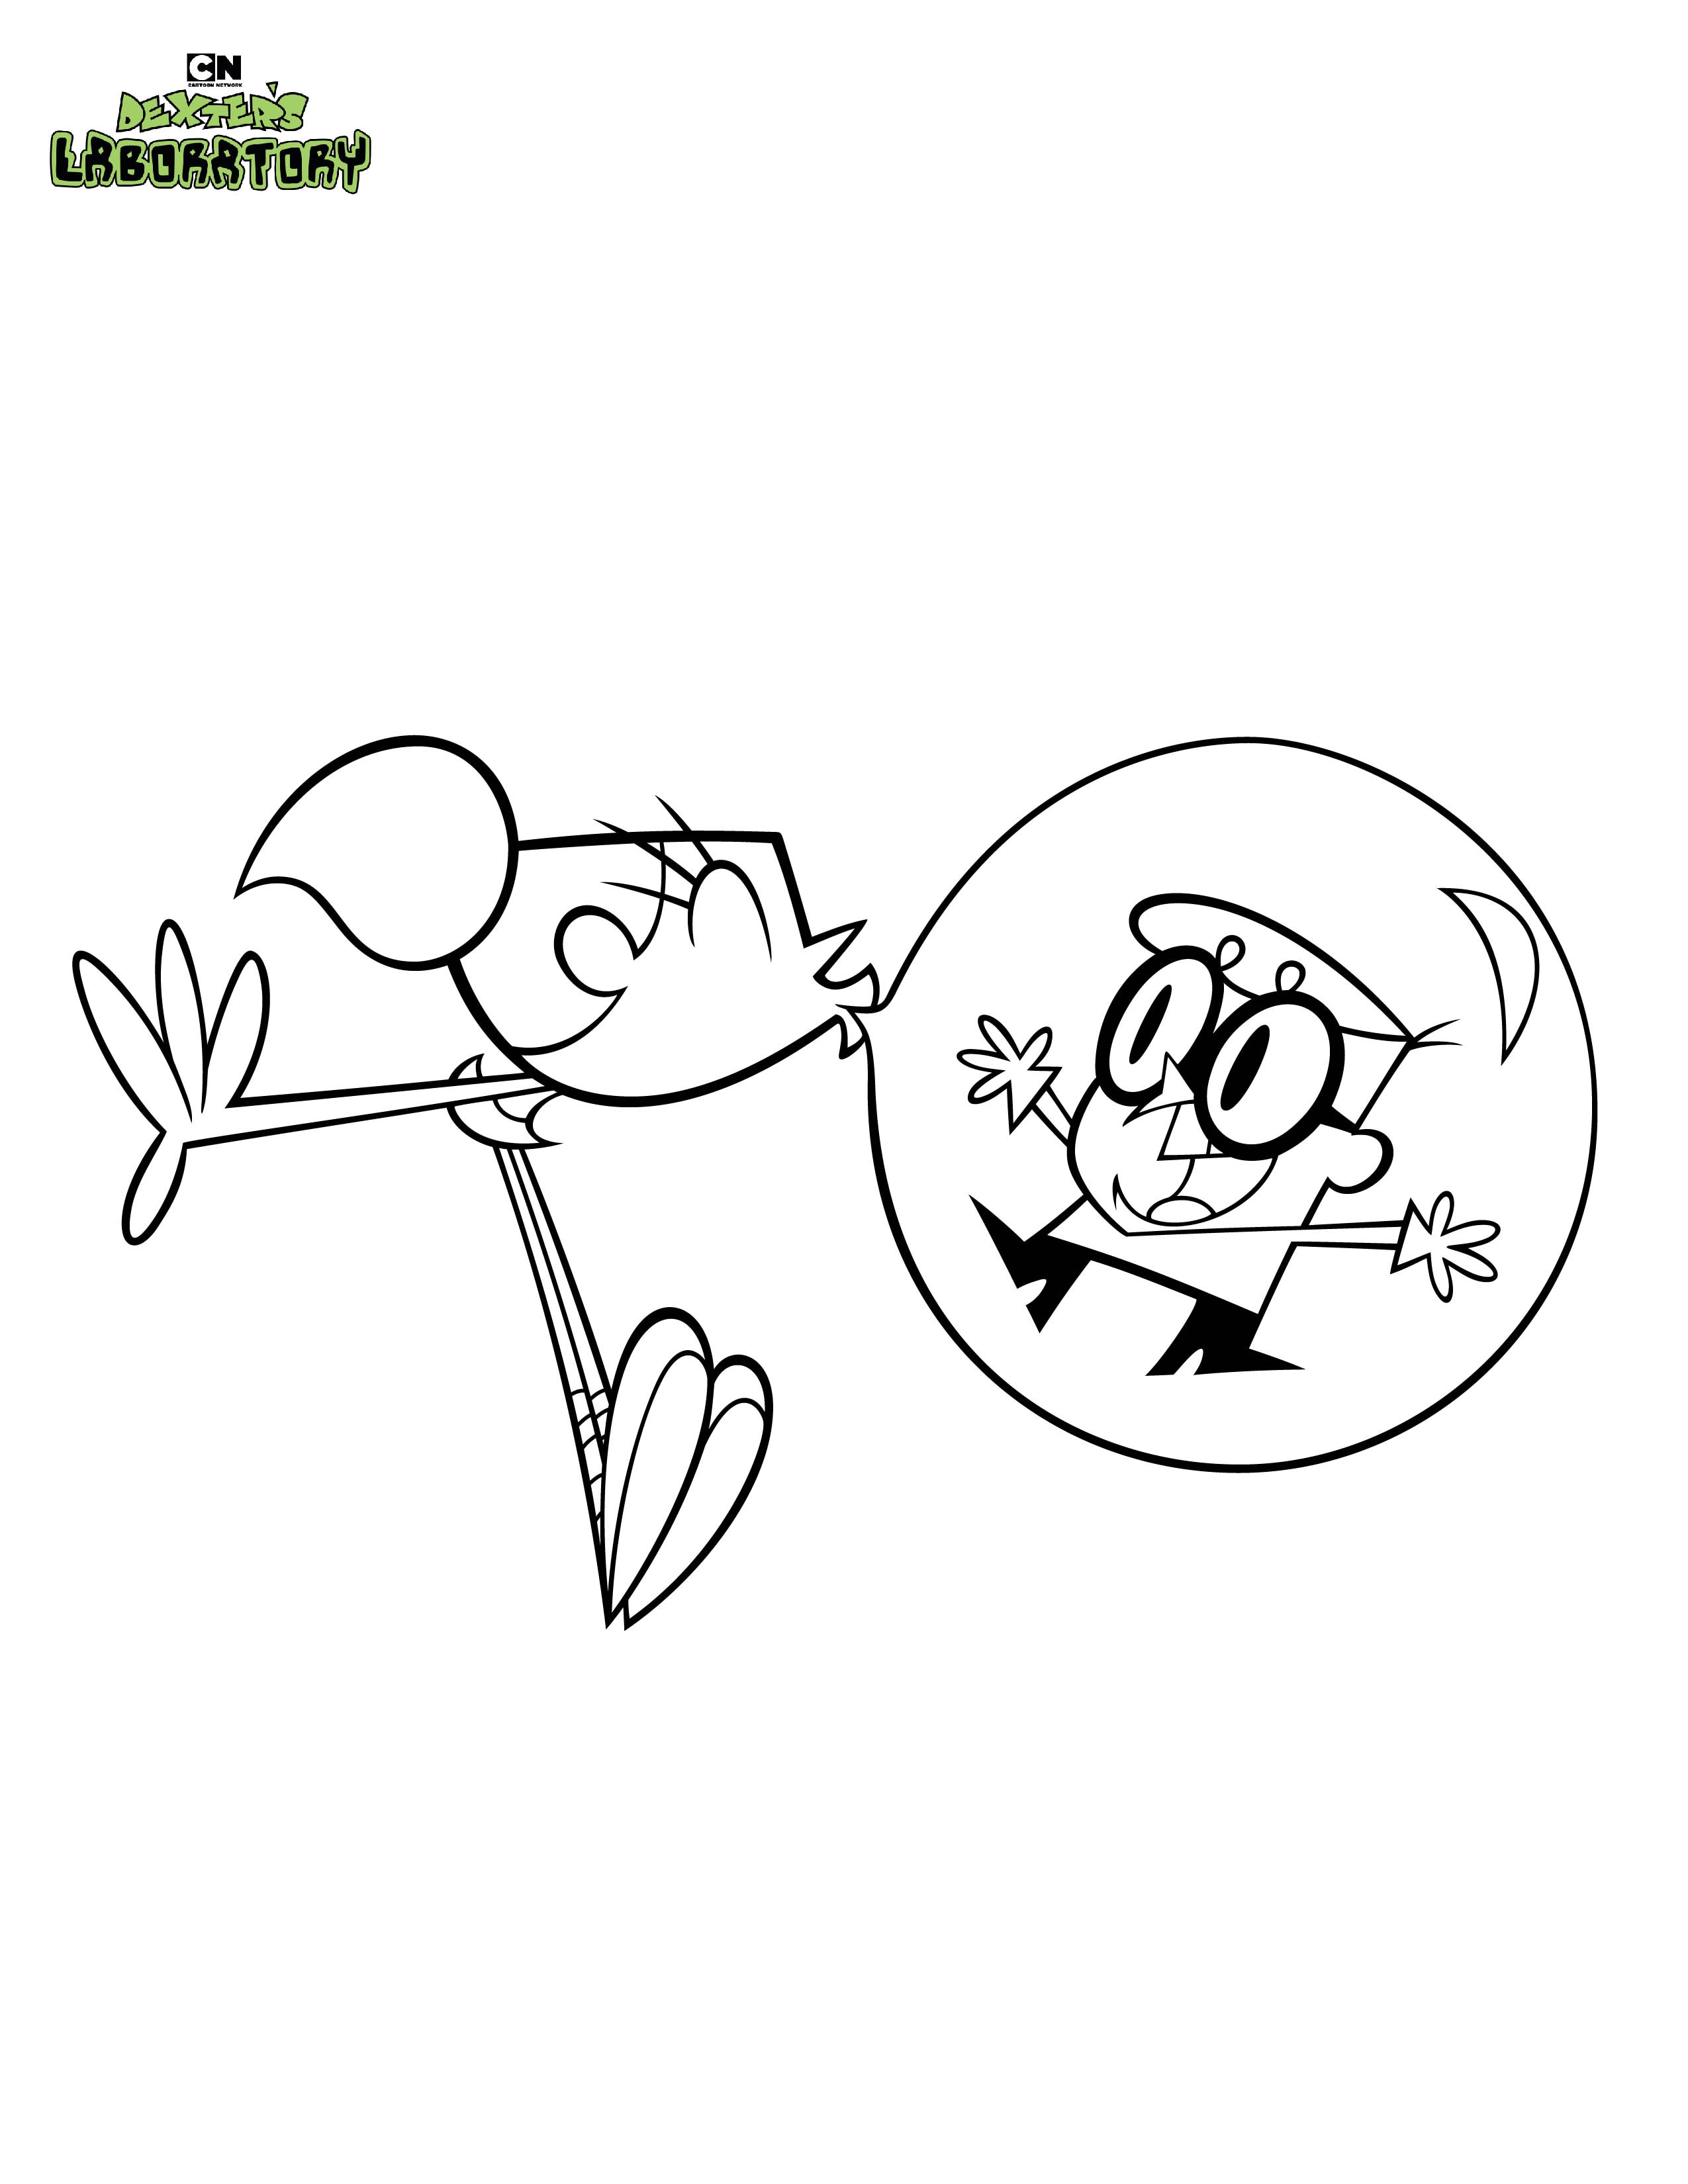 Cartoon Network Cartoon Coloring Pages For Adults / Cartoonnetwork.com